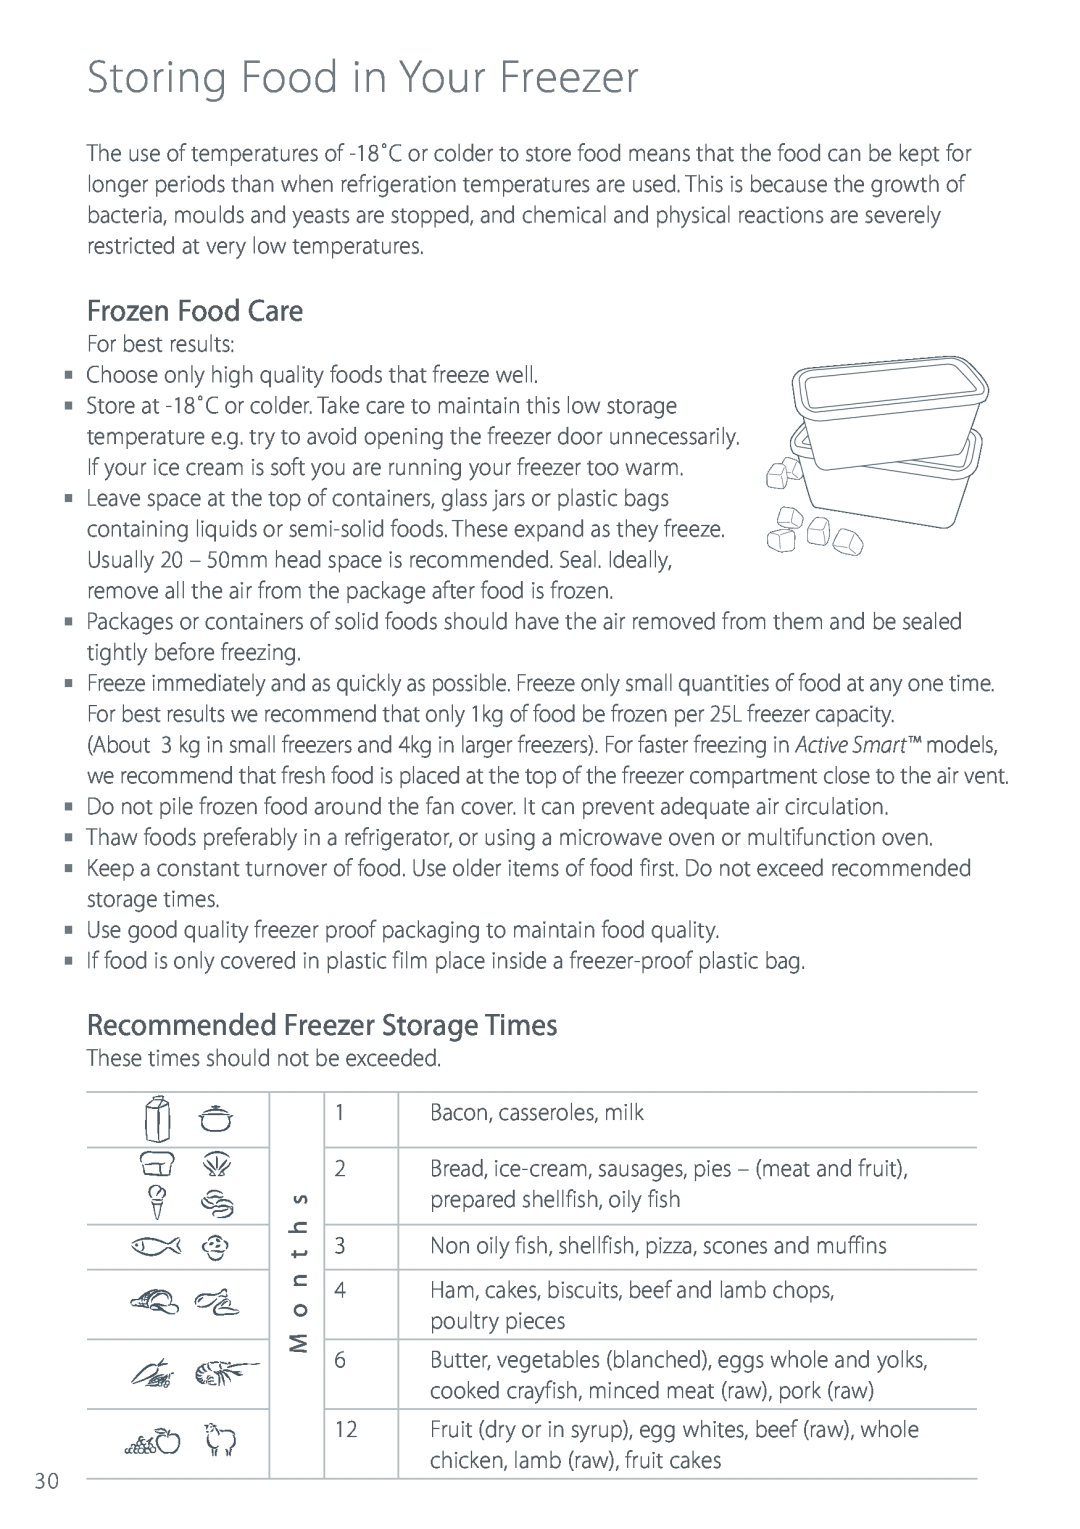 Fisher & Paykel Refrigerator & Freezer Storing Food in Your Freezer, Frozen Food Care, Recommended Freezer Storage Times 